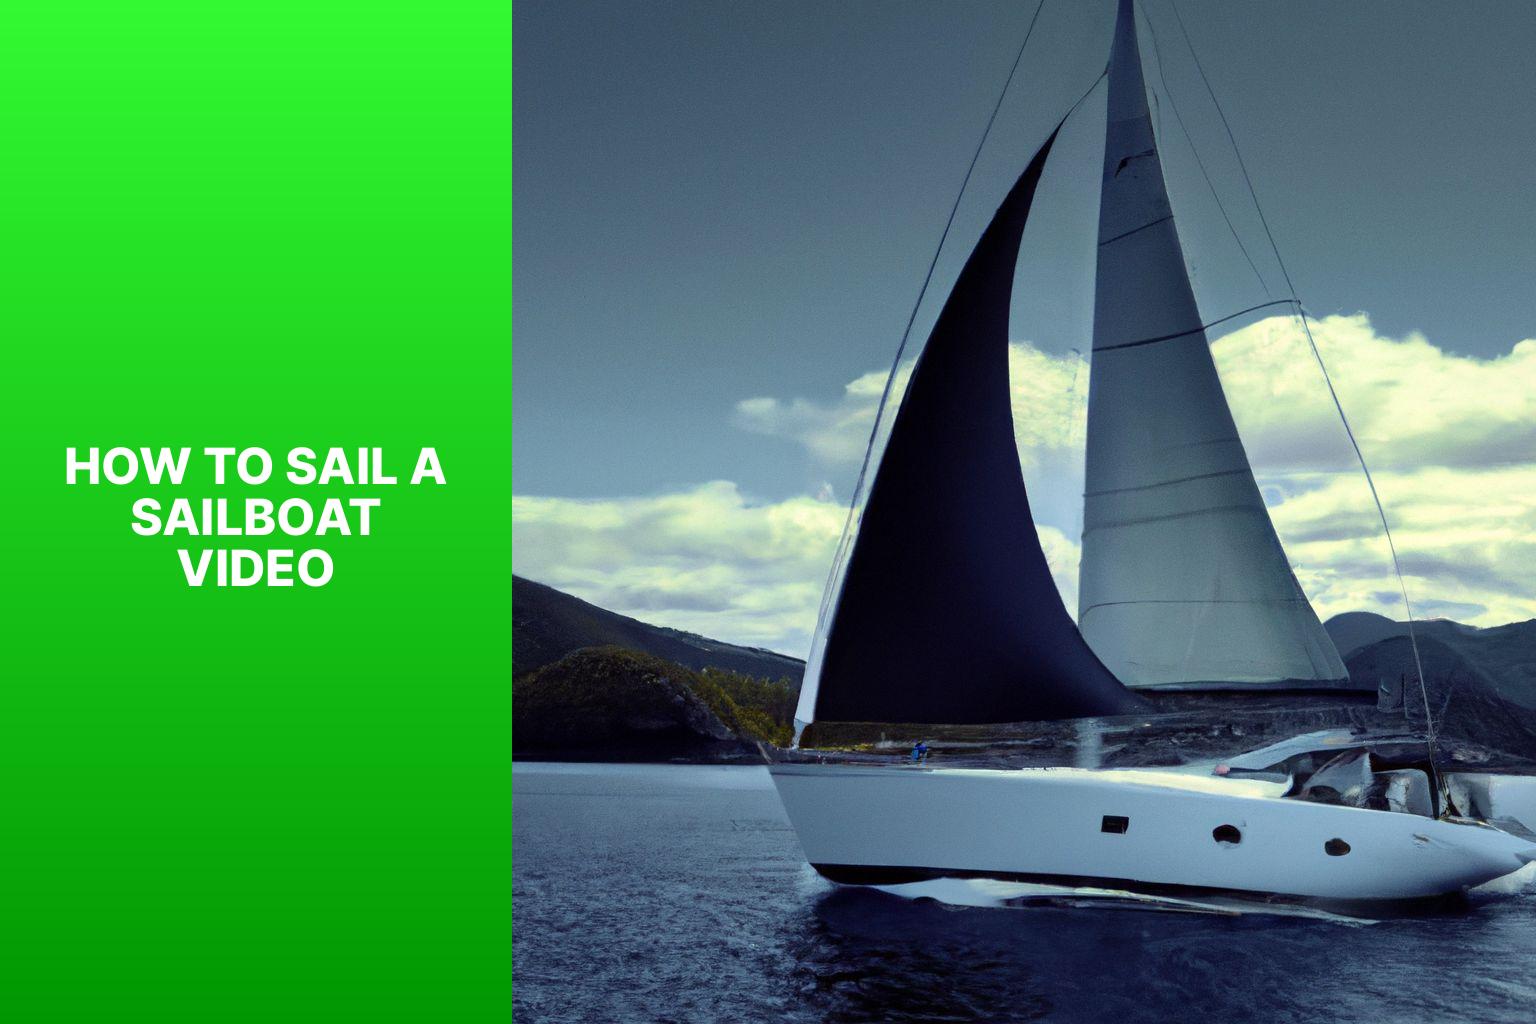 Learn How to Sail a Sailboat with Step-by-Step Video Instructions